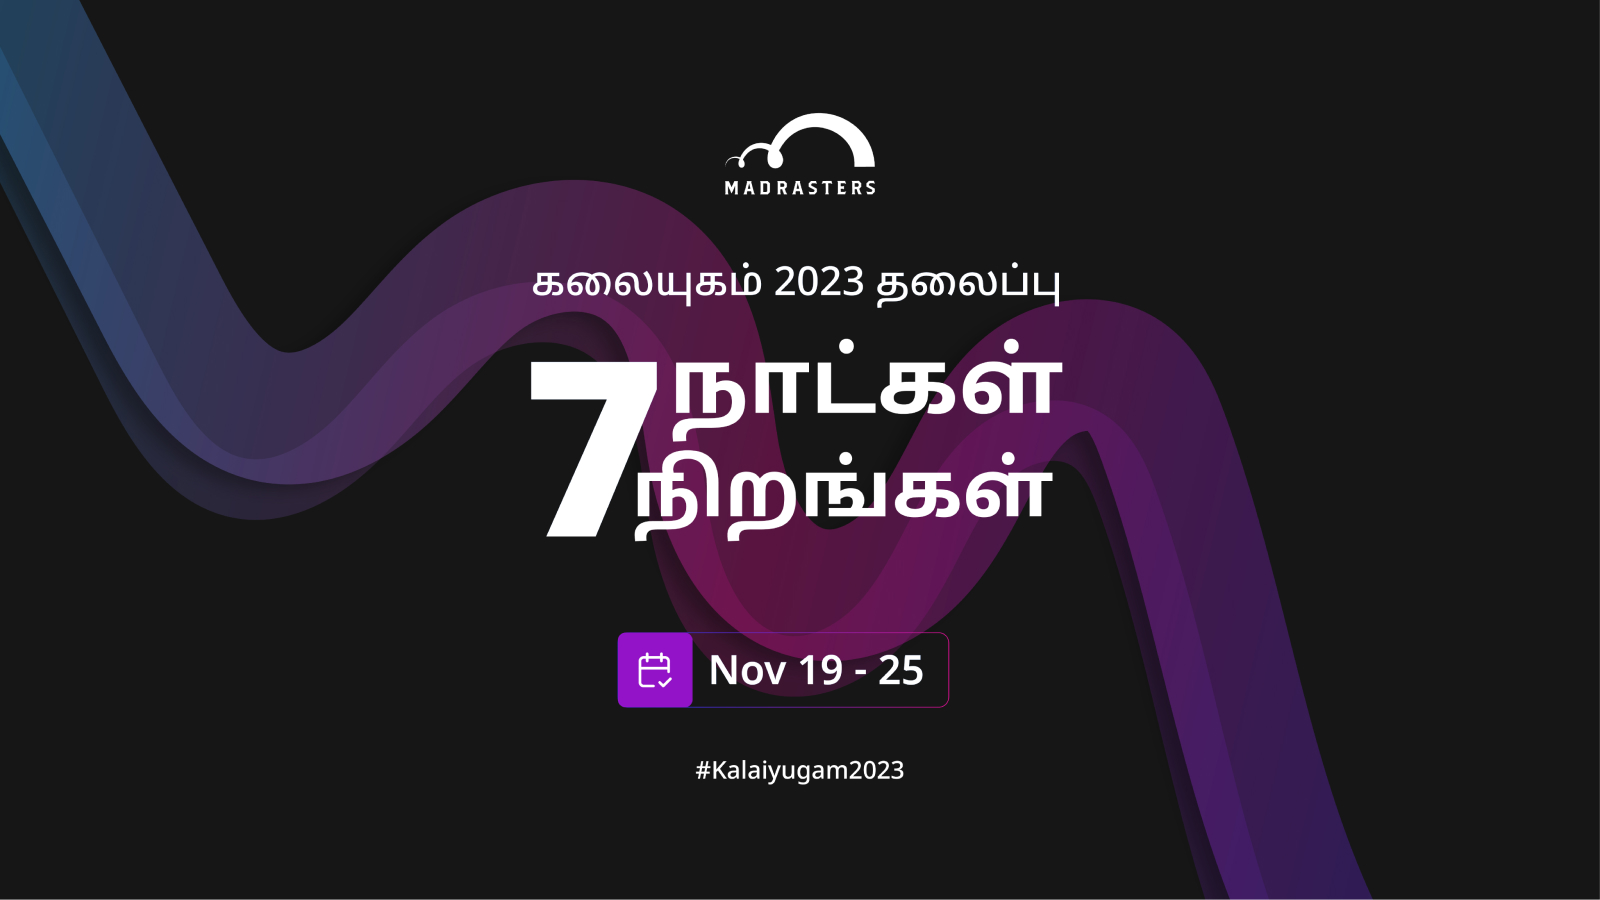 Once again, we're bringing together talented creators and artists to celebrate our love for the Thamizh language through an array of captivating typography art forms. We invite you to the fourth season of the Thamizh Typography Challenge. Be a part of this exciting journey as we celebrate the beauty of the language through artistry! 7 days & 7 colors to unleash your creativity through letters and words